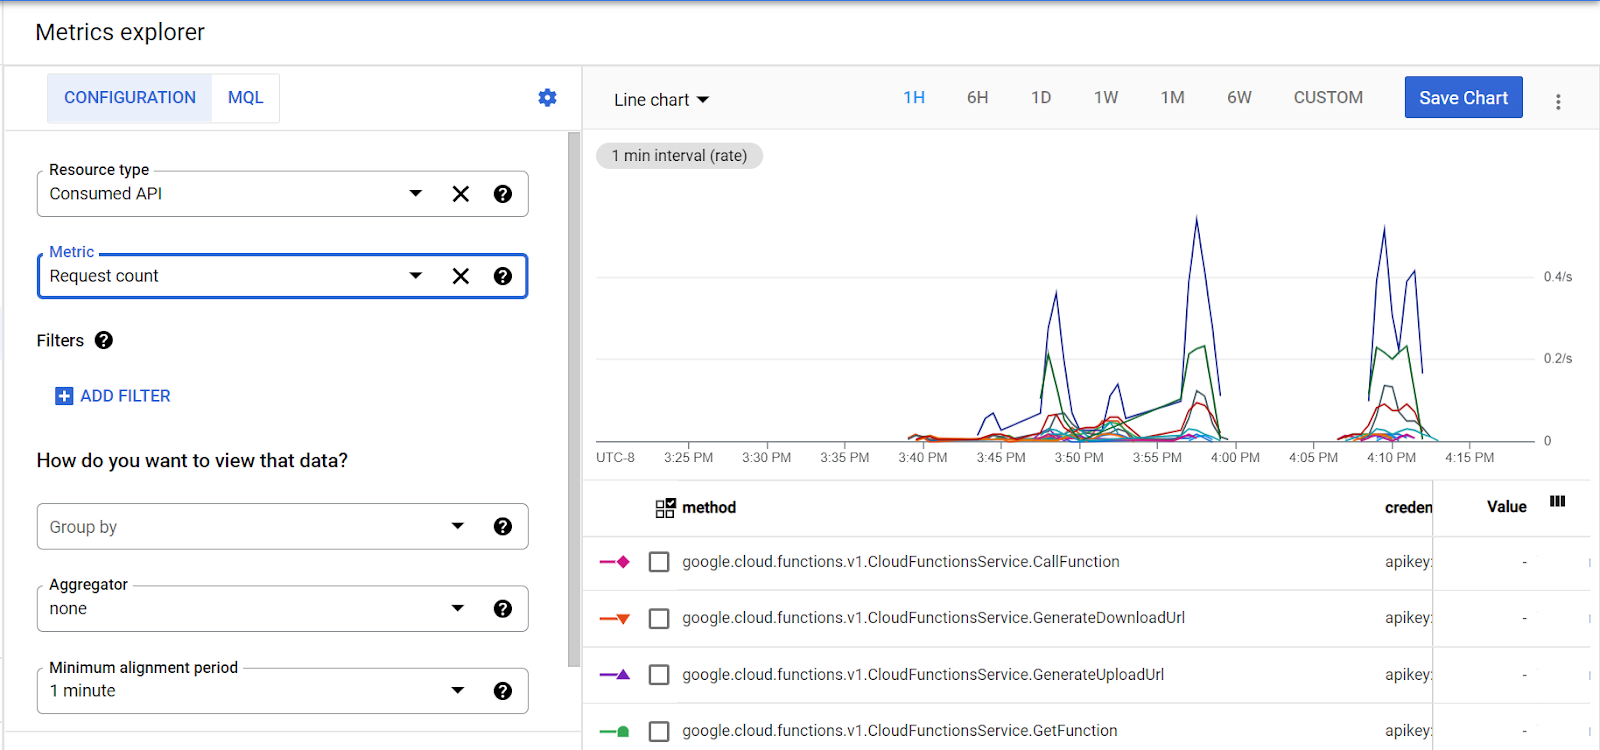 Metrics Explorer showing Consumed APIs metrics for Request Count with an aggregator and time period specified.